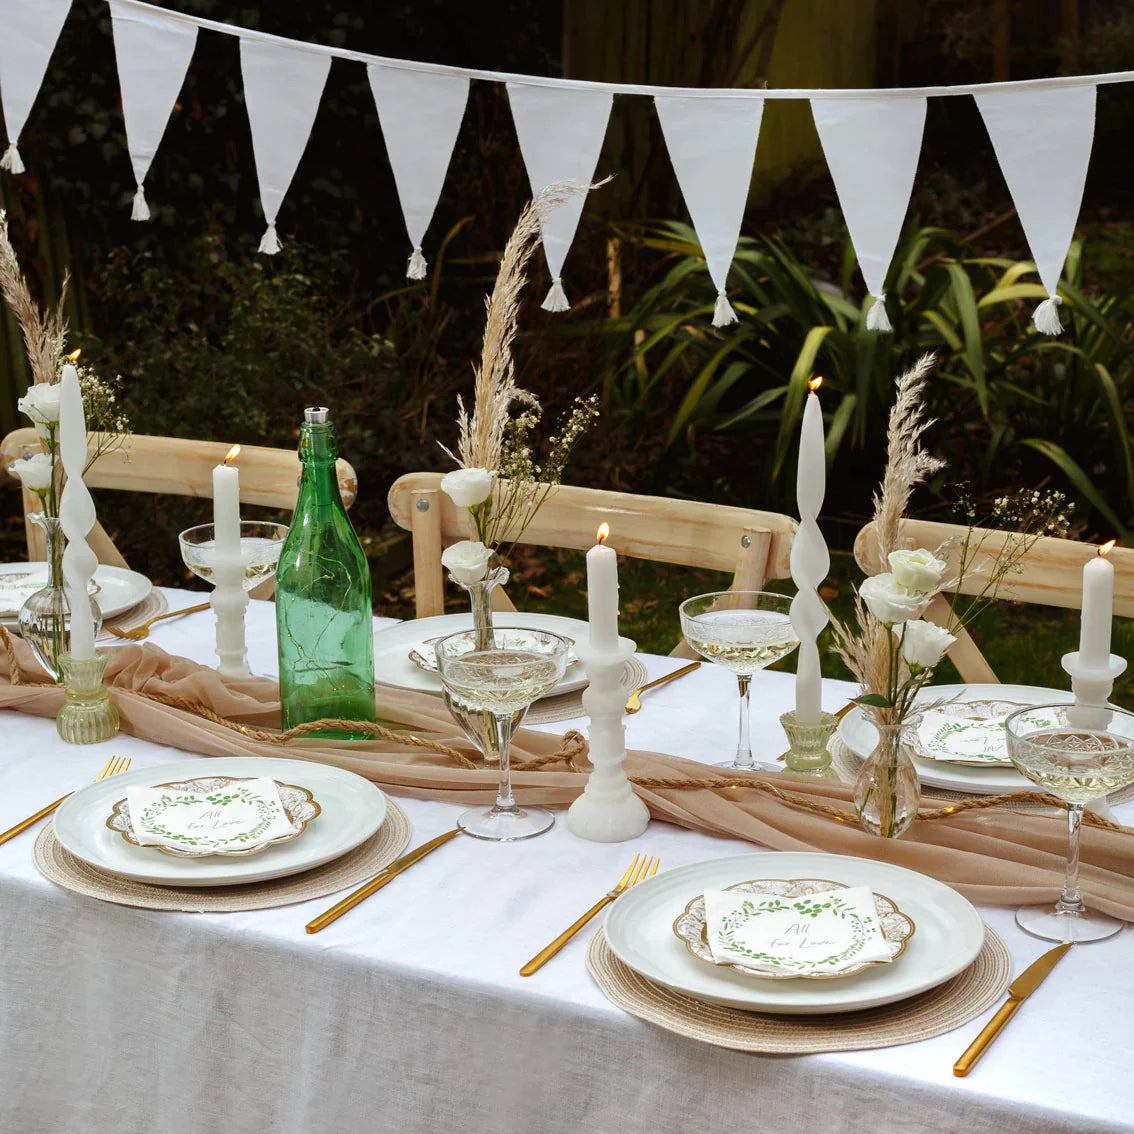 Outdoor table with lots of decorative pieces, candles and bunting